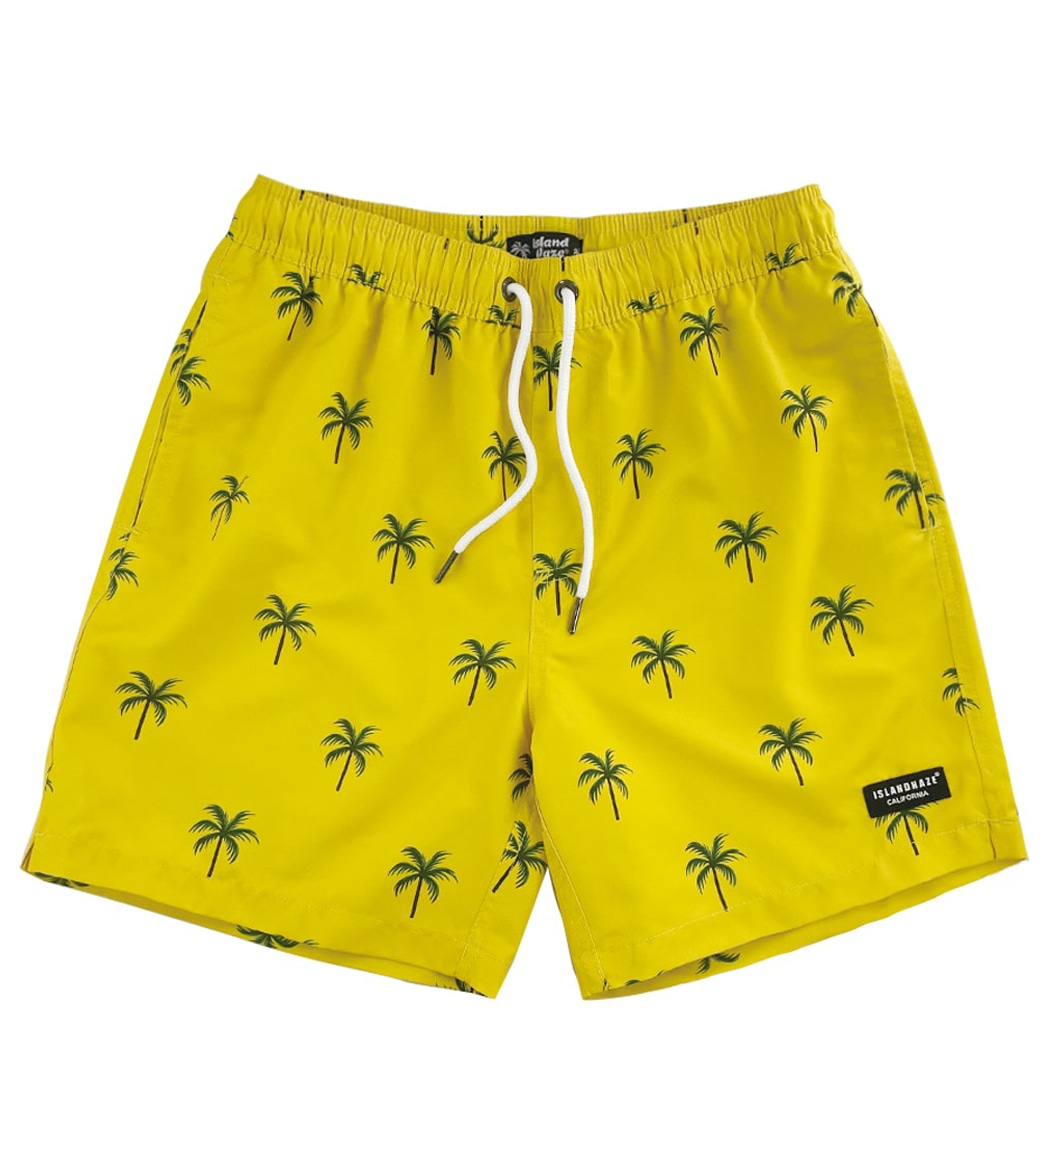 Island Haze Men's 17 Marino Printed Volley Shorts - Yellow Large Polyester - Swimoutlet.com